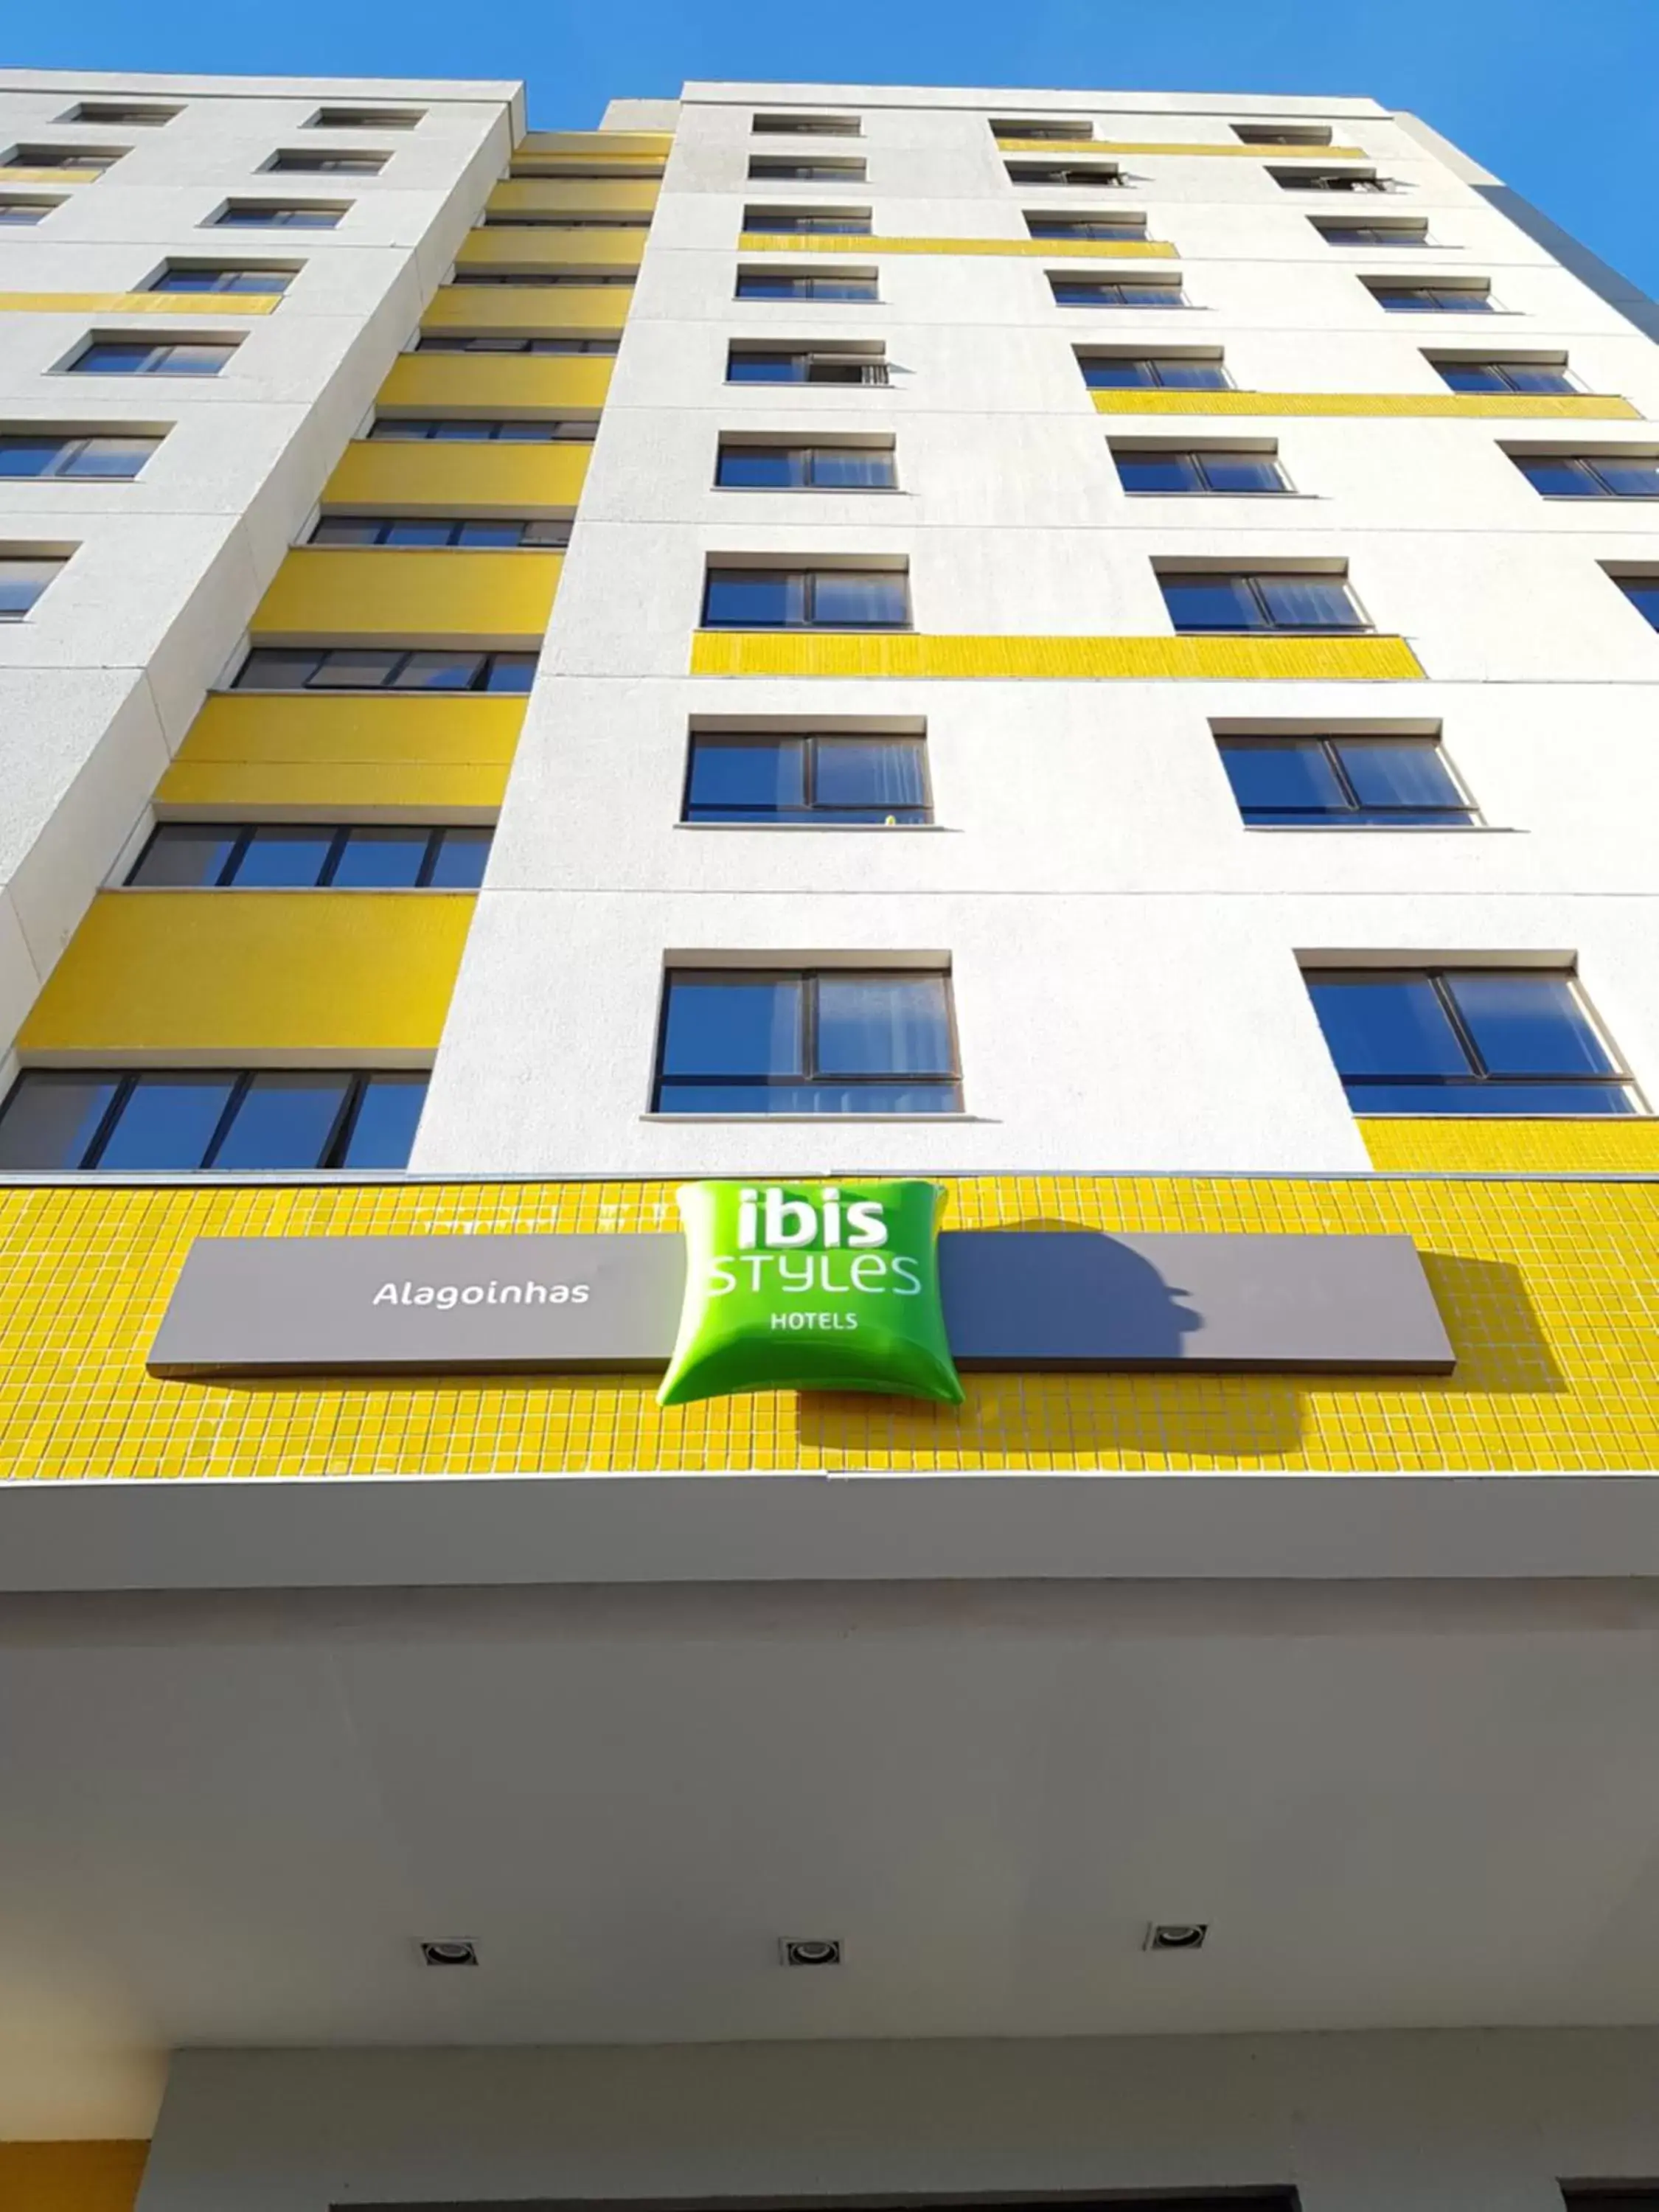 Property Building in ibis Styles Alagoinhas